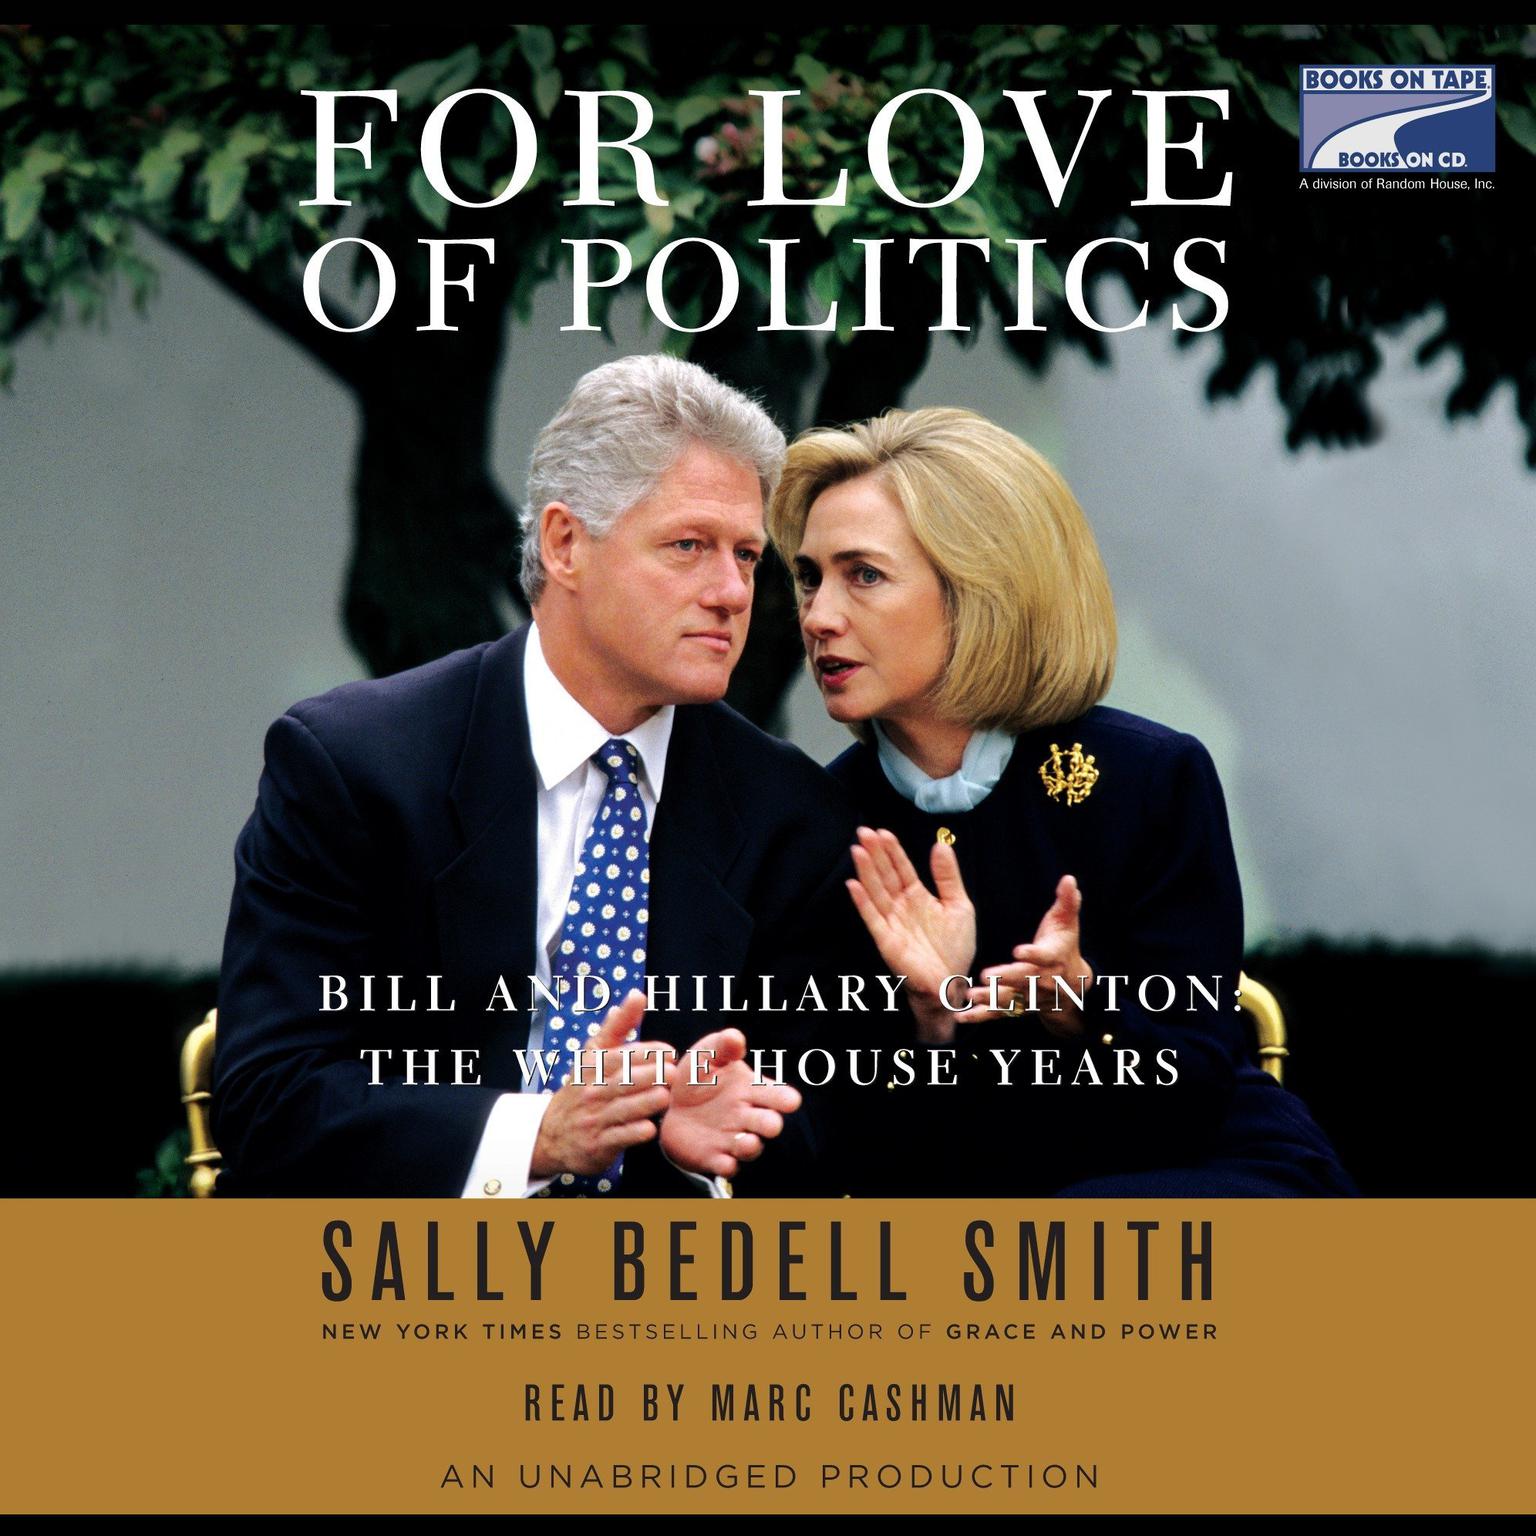 For Love of Politics (Abridged): Bill and Hillary Clinton: The White House Years Audiobook, by Sally Bedell Smith